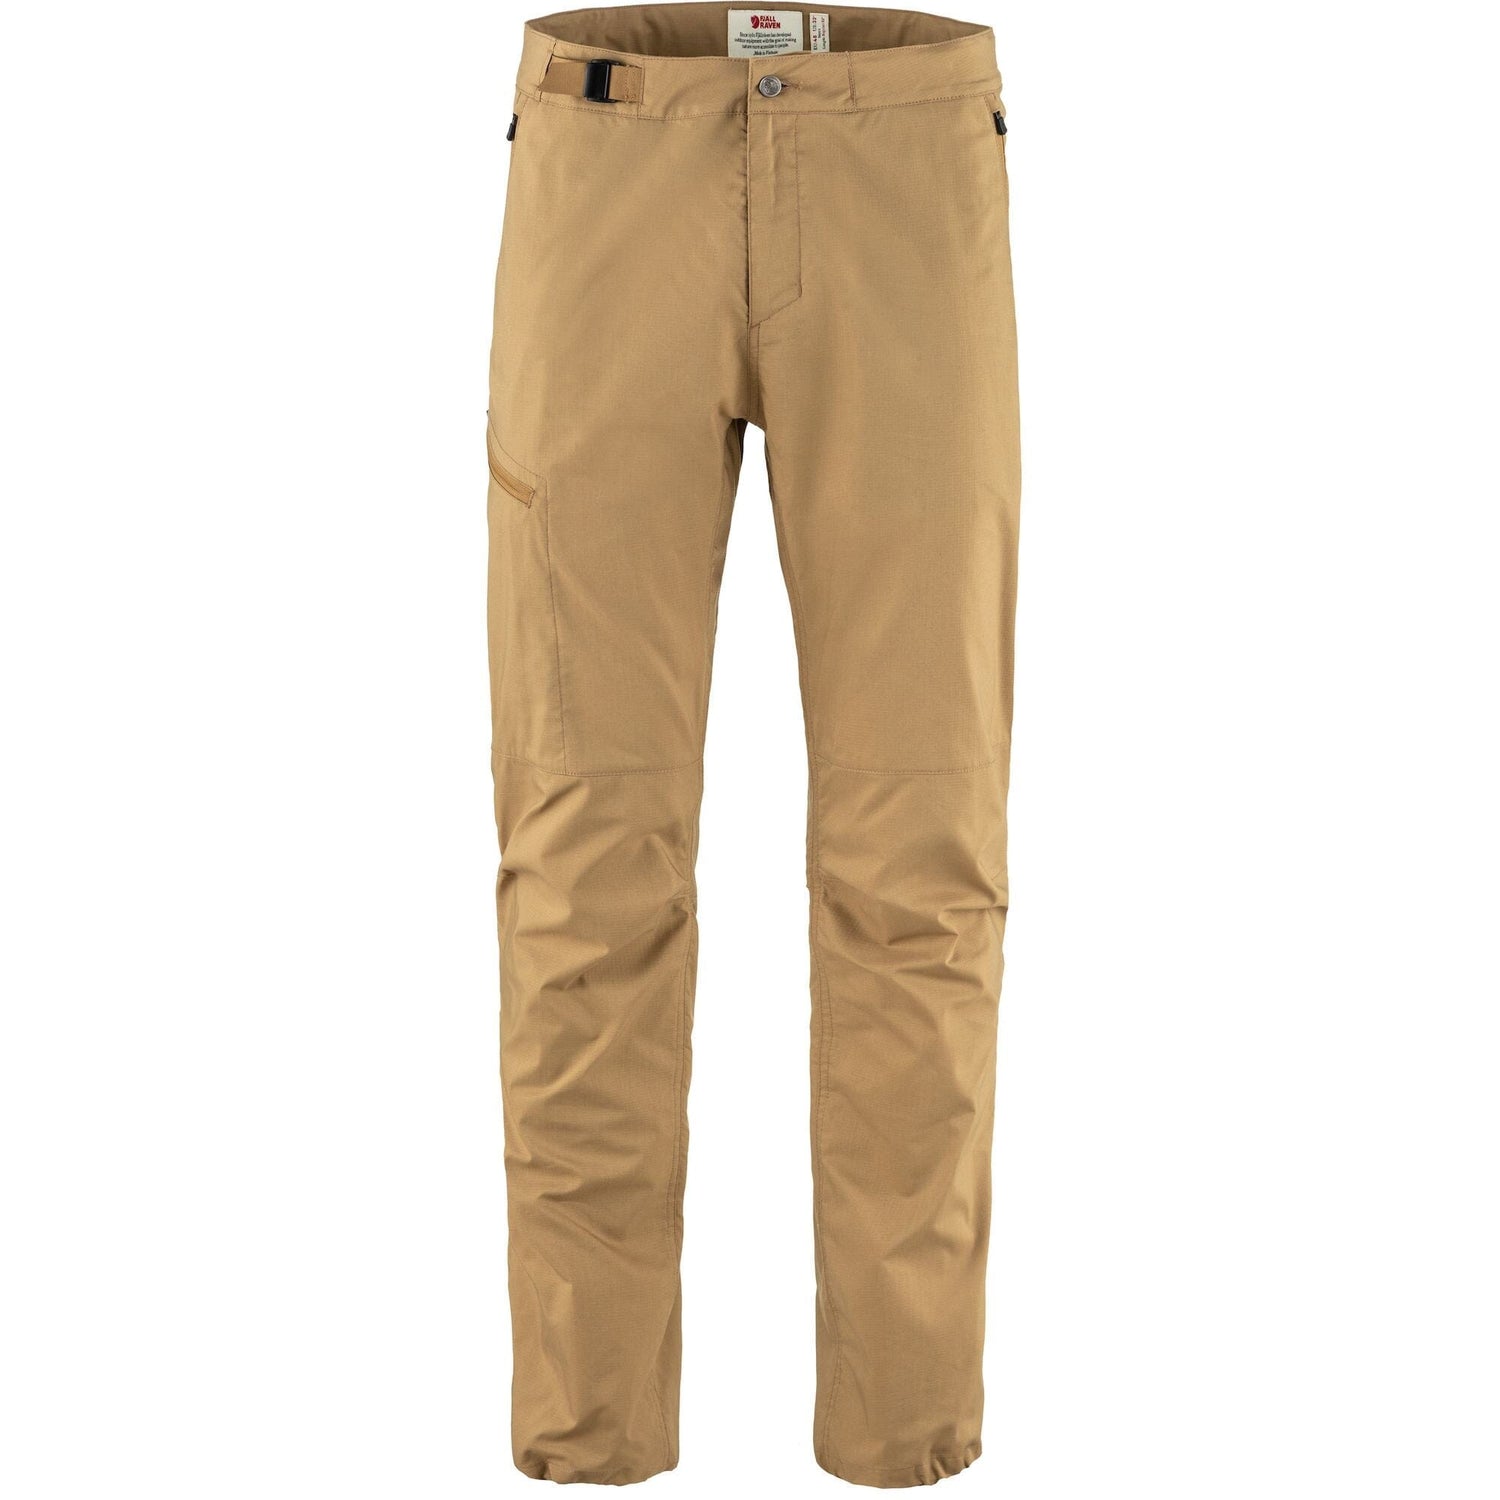 Fjällräven - M's Abisko Hike Trousers - Recycled polyester & Organic cotton - Weekendbee - sustainable sportswear